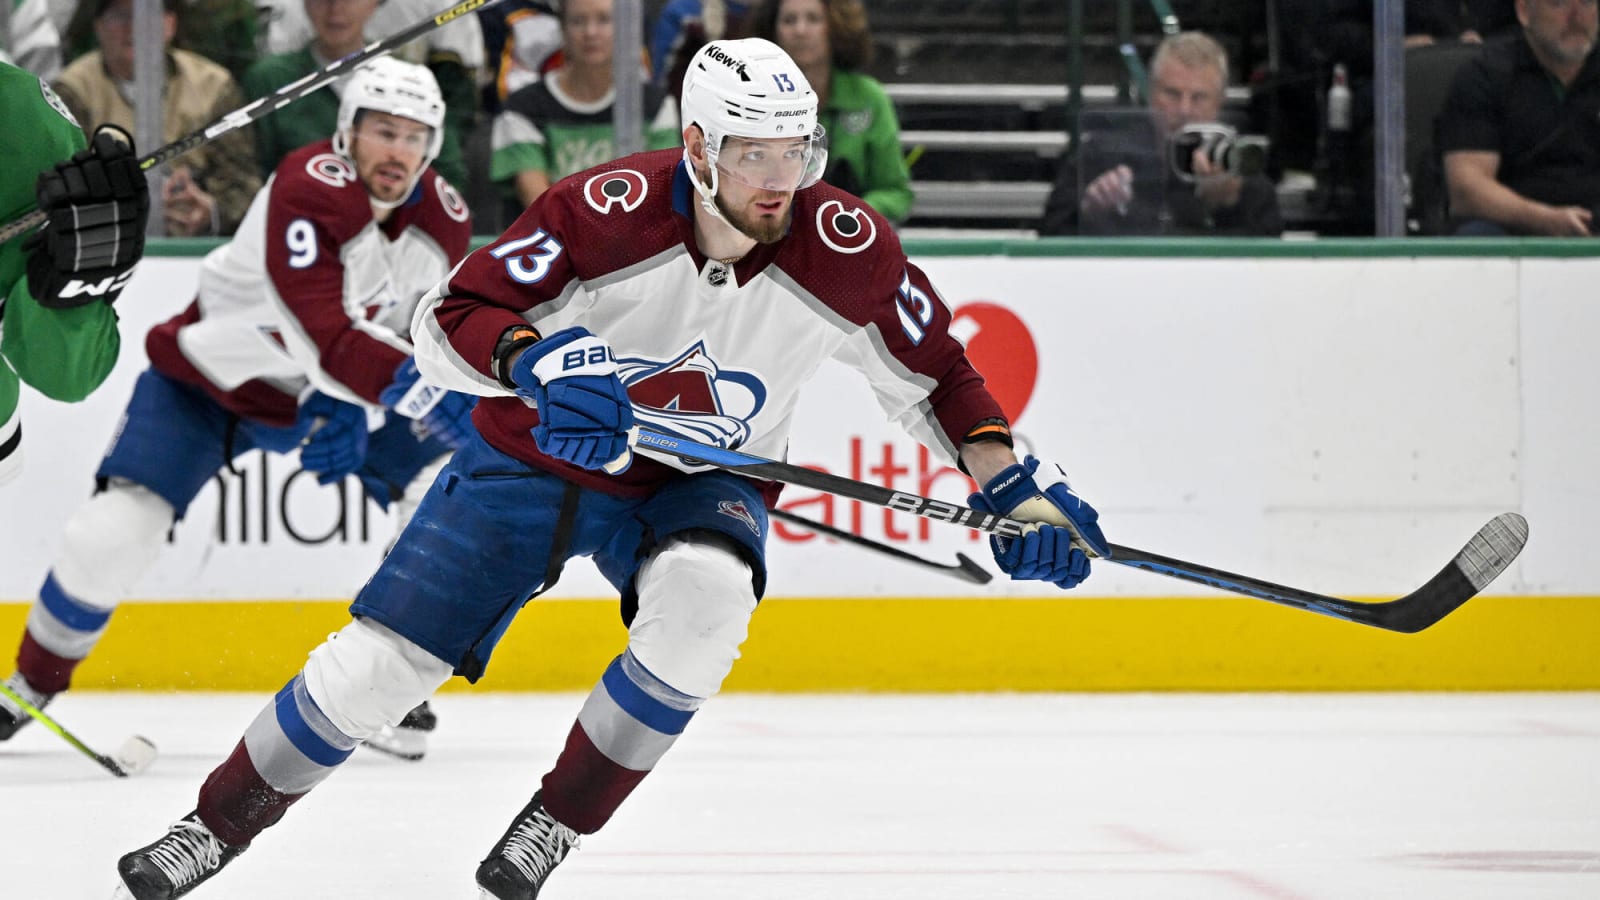 Avs’ Valeri Nichushkin Suspended for 6 Months Without Pay